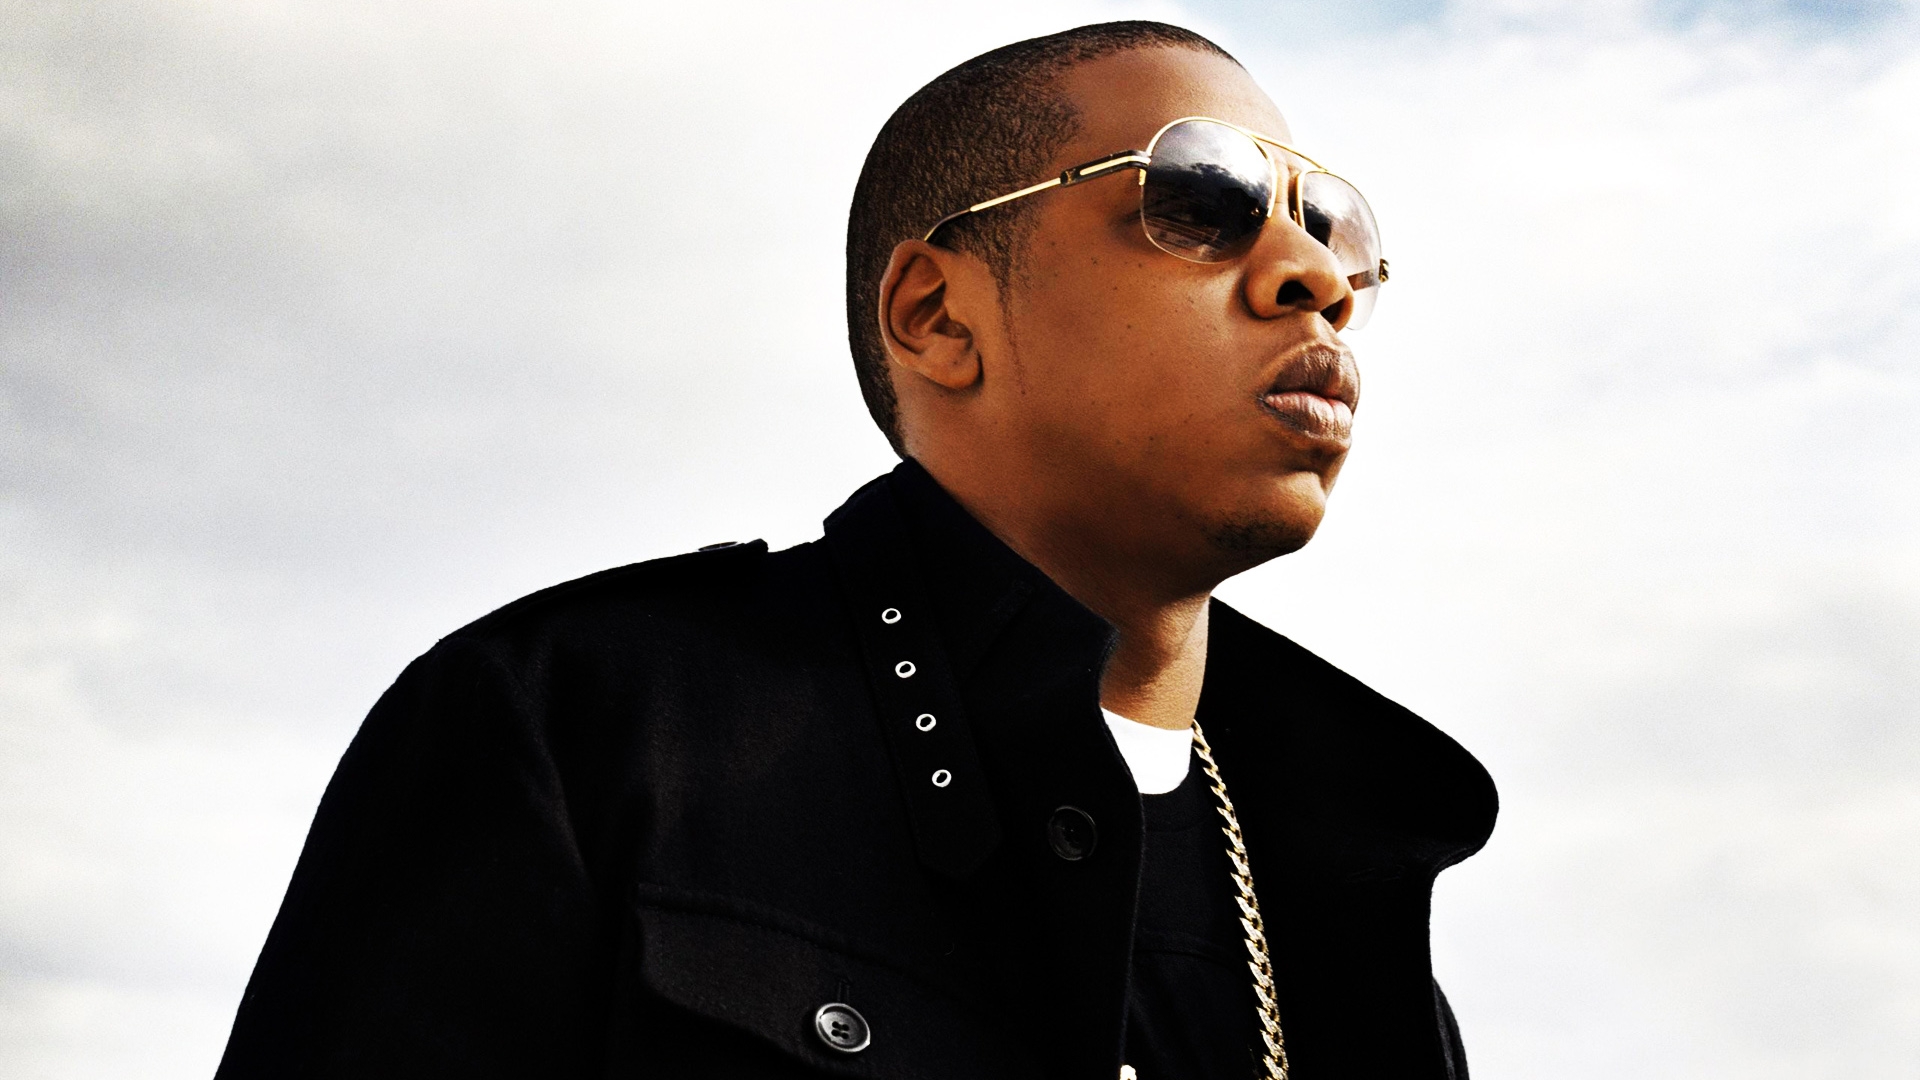 Jay Z Wallpaper HD Celebrity And Movie Pictures Photos